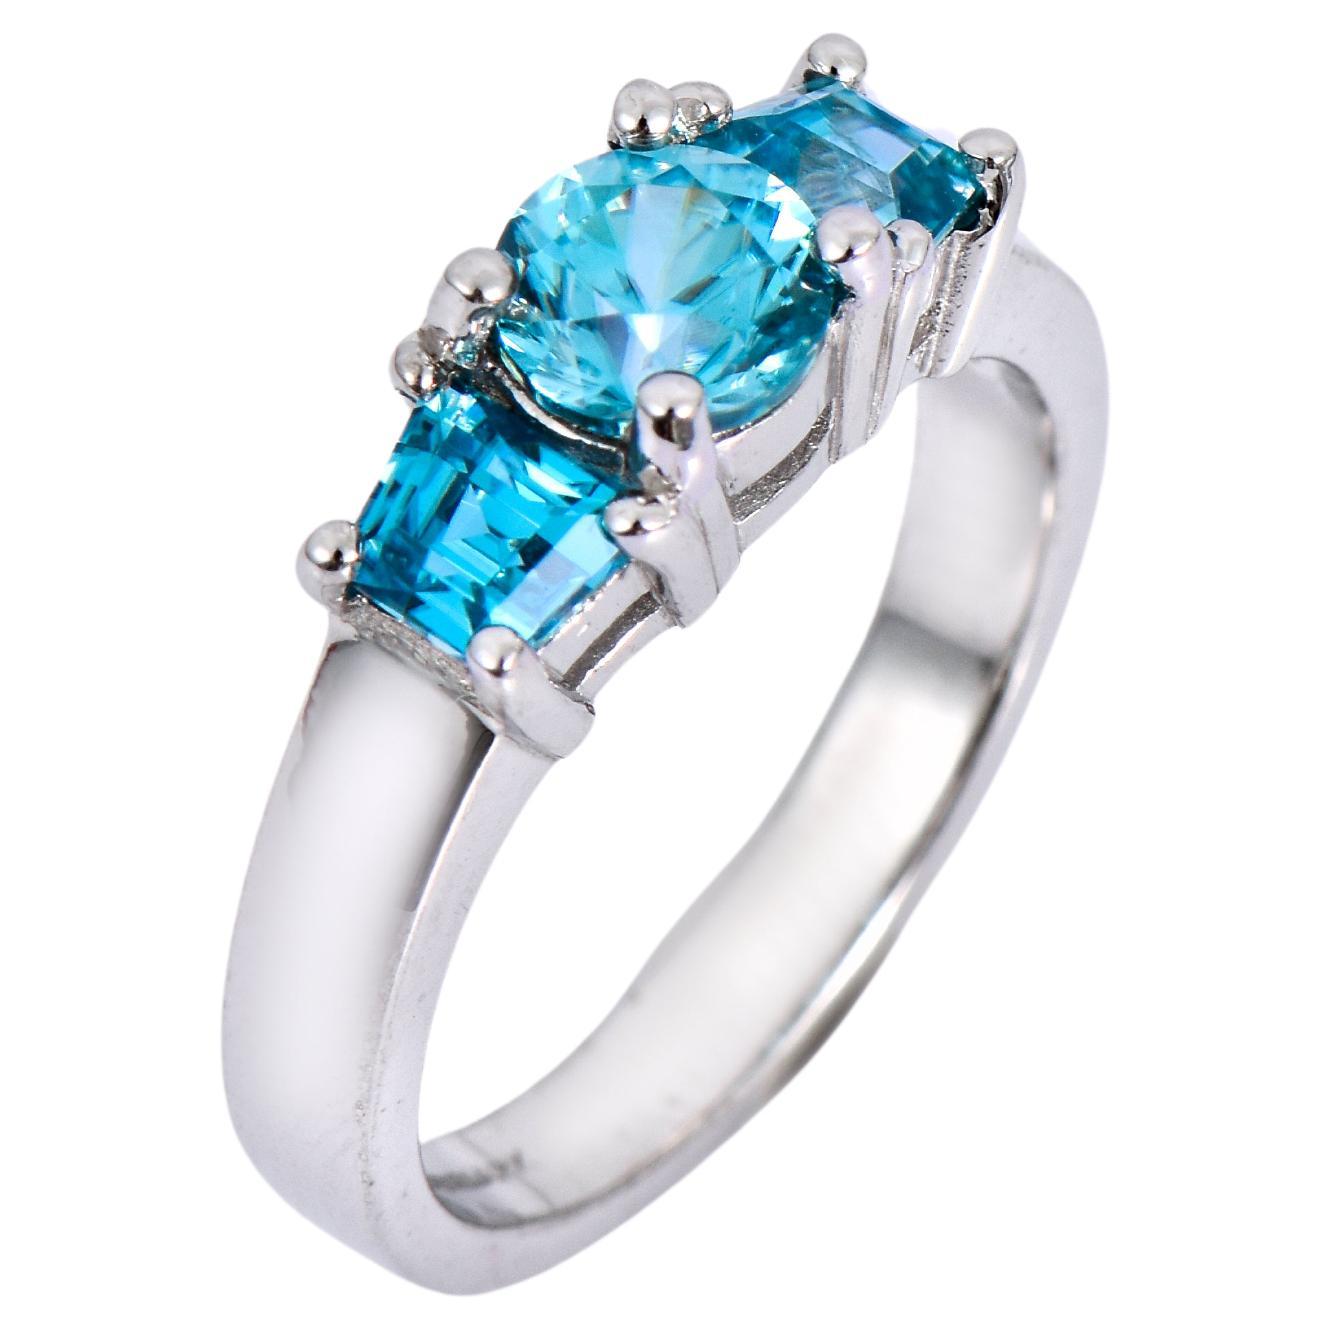 Orloff of Denmark, 2.65 ct Natural Blue Zircon Ring in 925 Sterling Silver For Sale